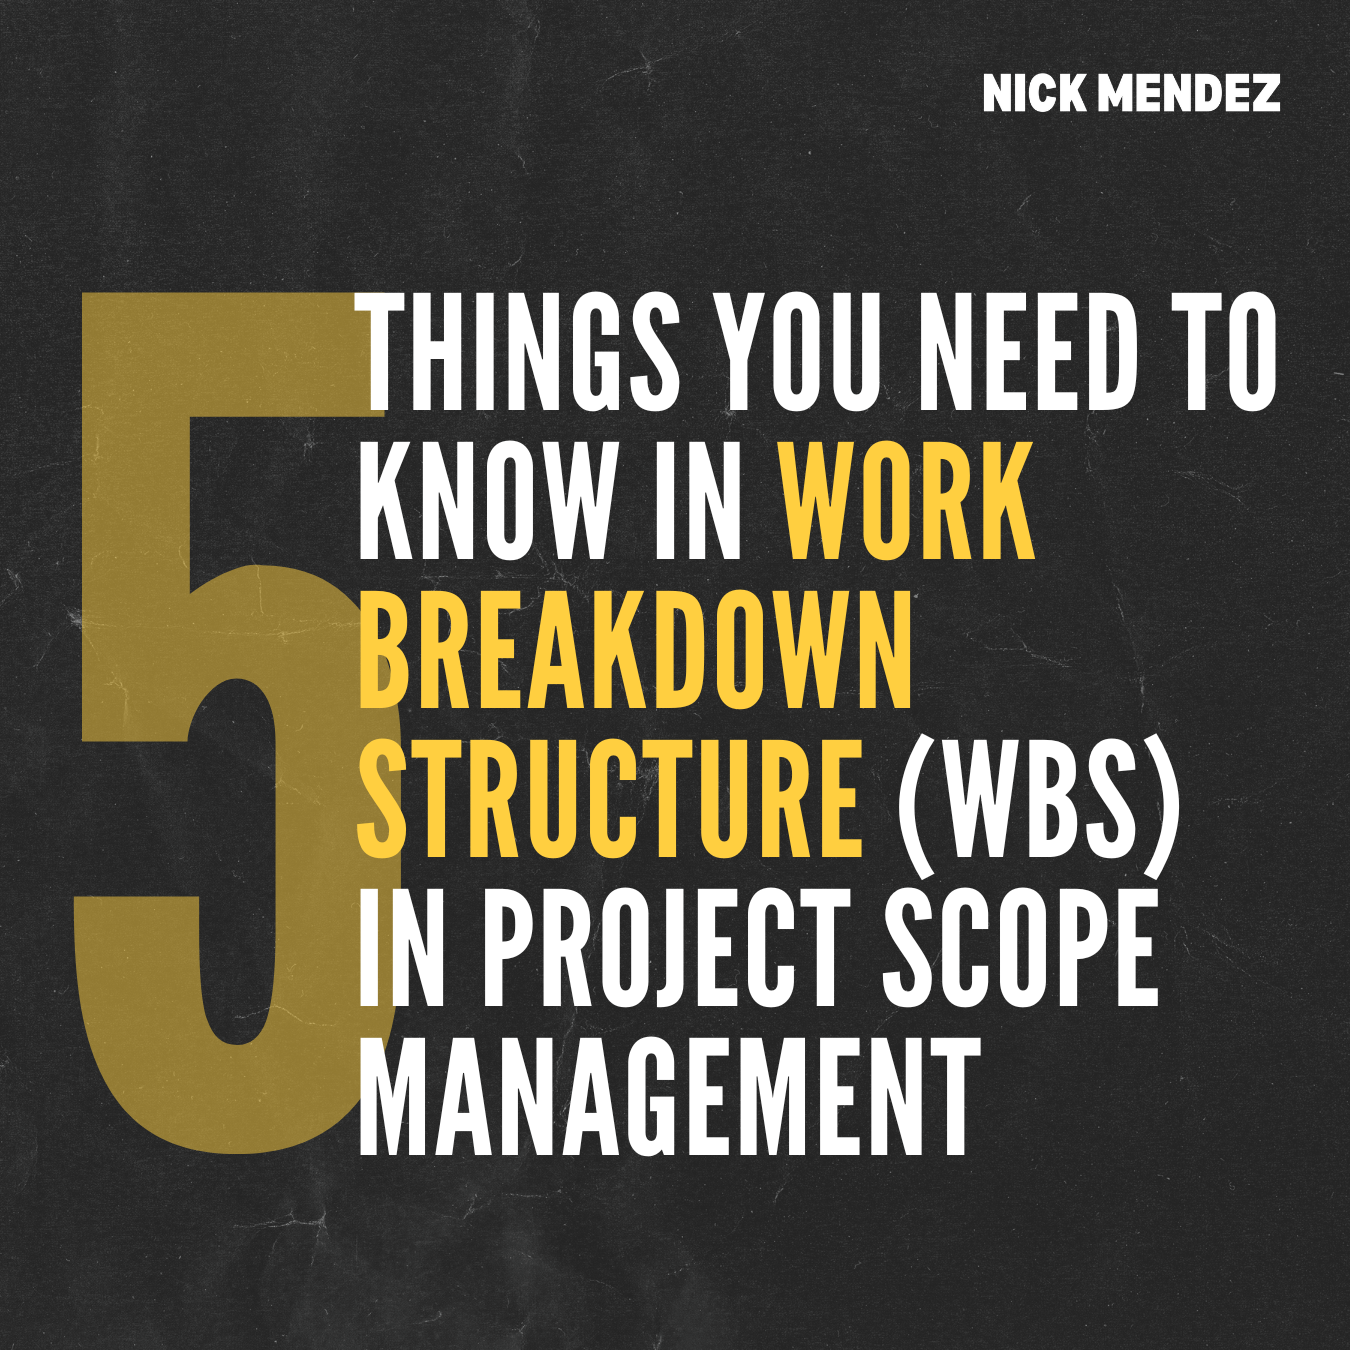 5 Things You Need to Know in Work Breakdown Structure (WBS) in Project Scope Management by Nicholas Mendez, Nick Mendez